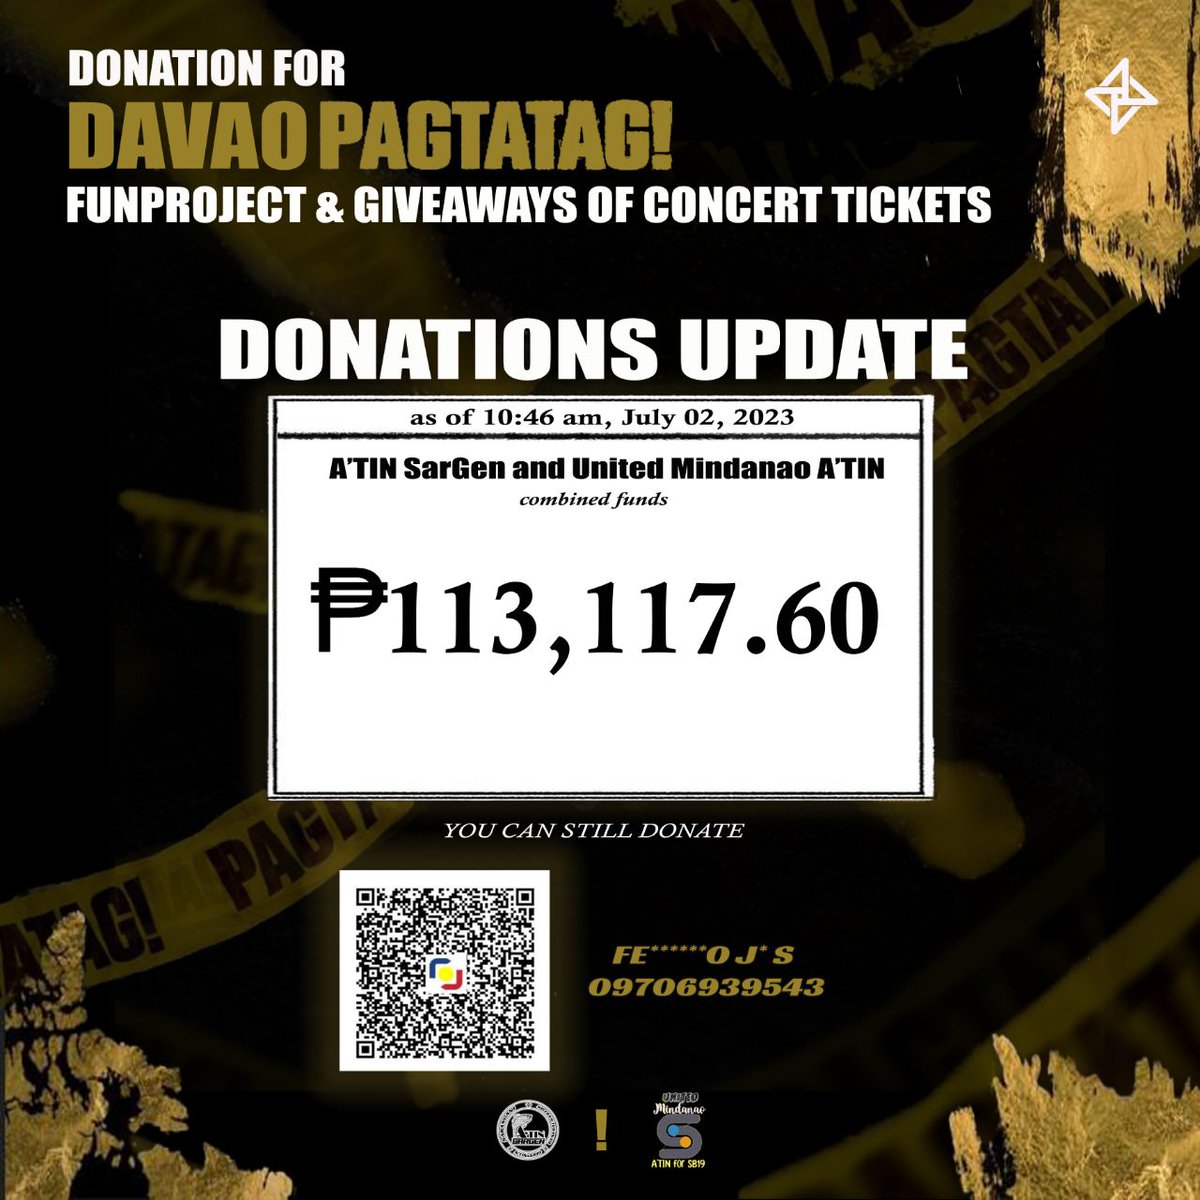 📢UPDATE: The impact of your incredible support is undeniable! Our donation drive has now reached an astonishing Php 113,117.60! 🌟🙌 A heartfelt thank you for your unwavering dedication and generosity. 

#PagtatagDavaoCon Donation Drive till July 3, 11:59pm

#SB19xATIN